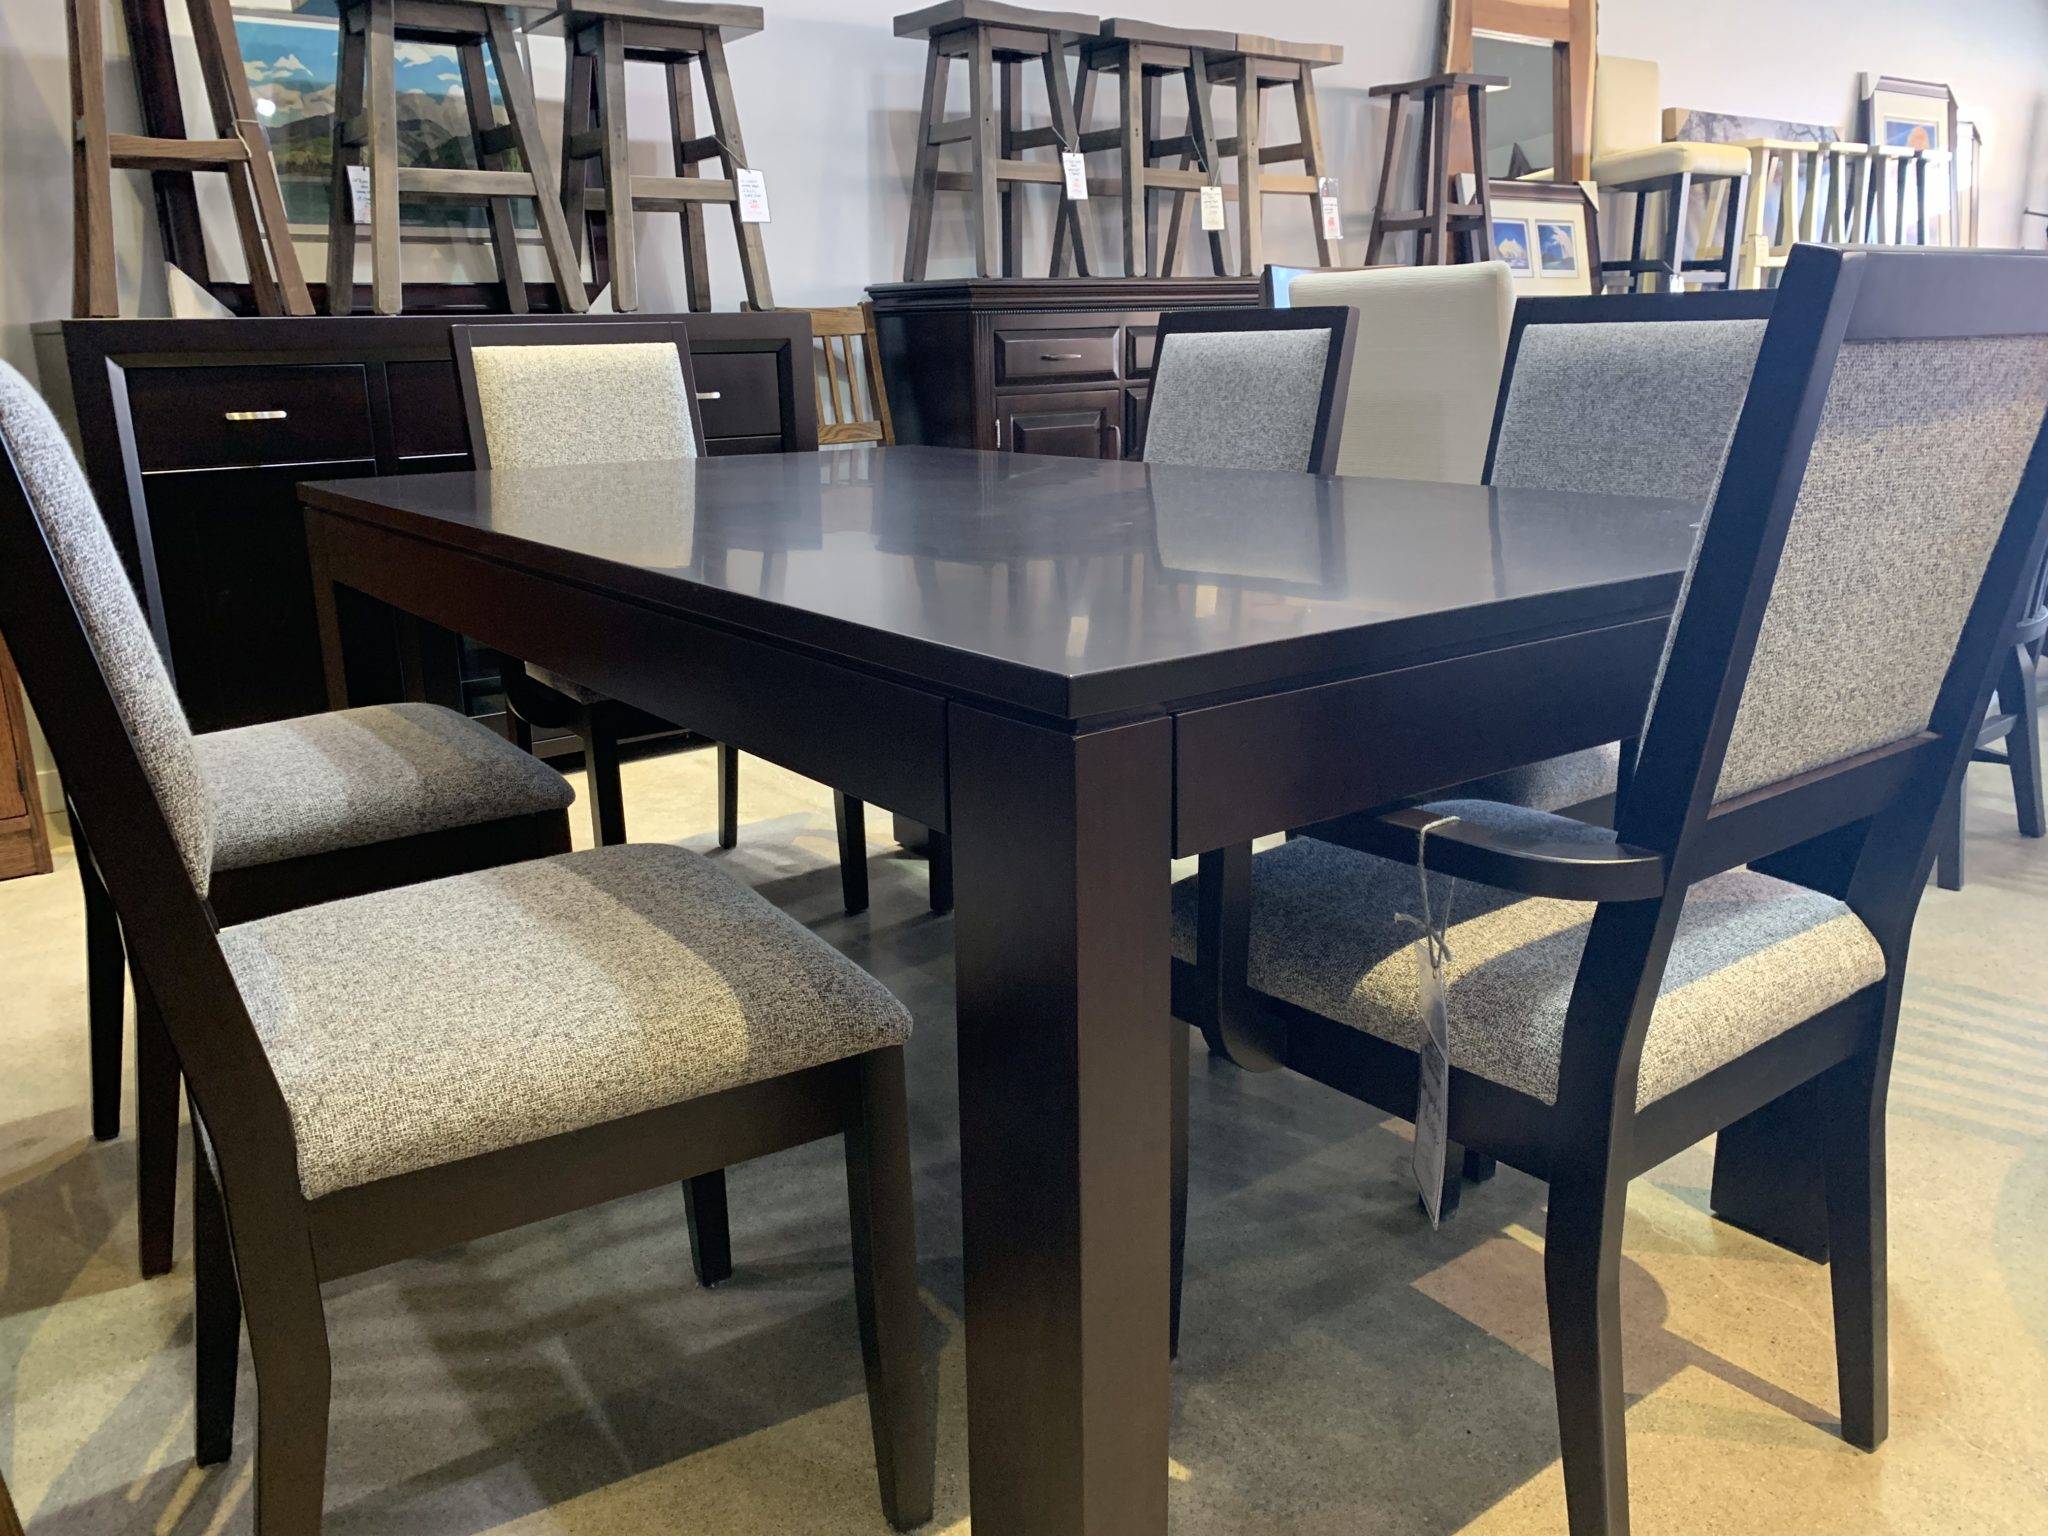 Mannheim Table Chairs Dining Set Penwood Furniture